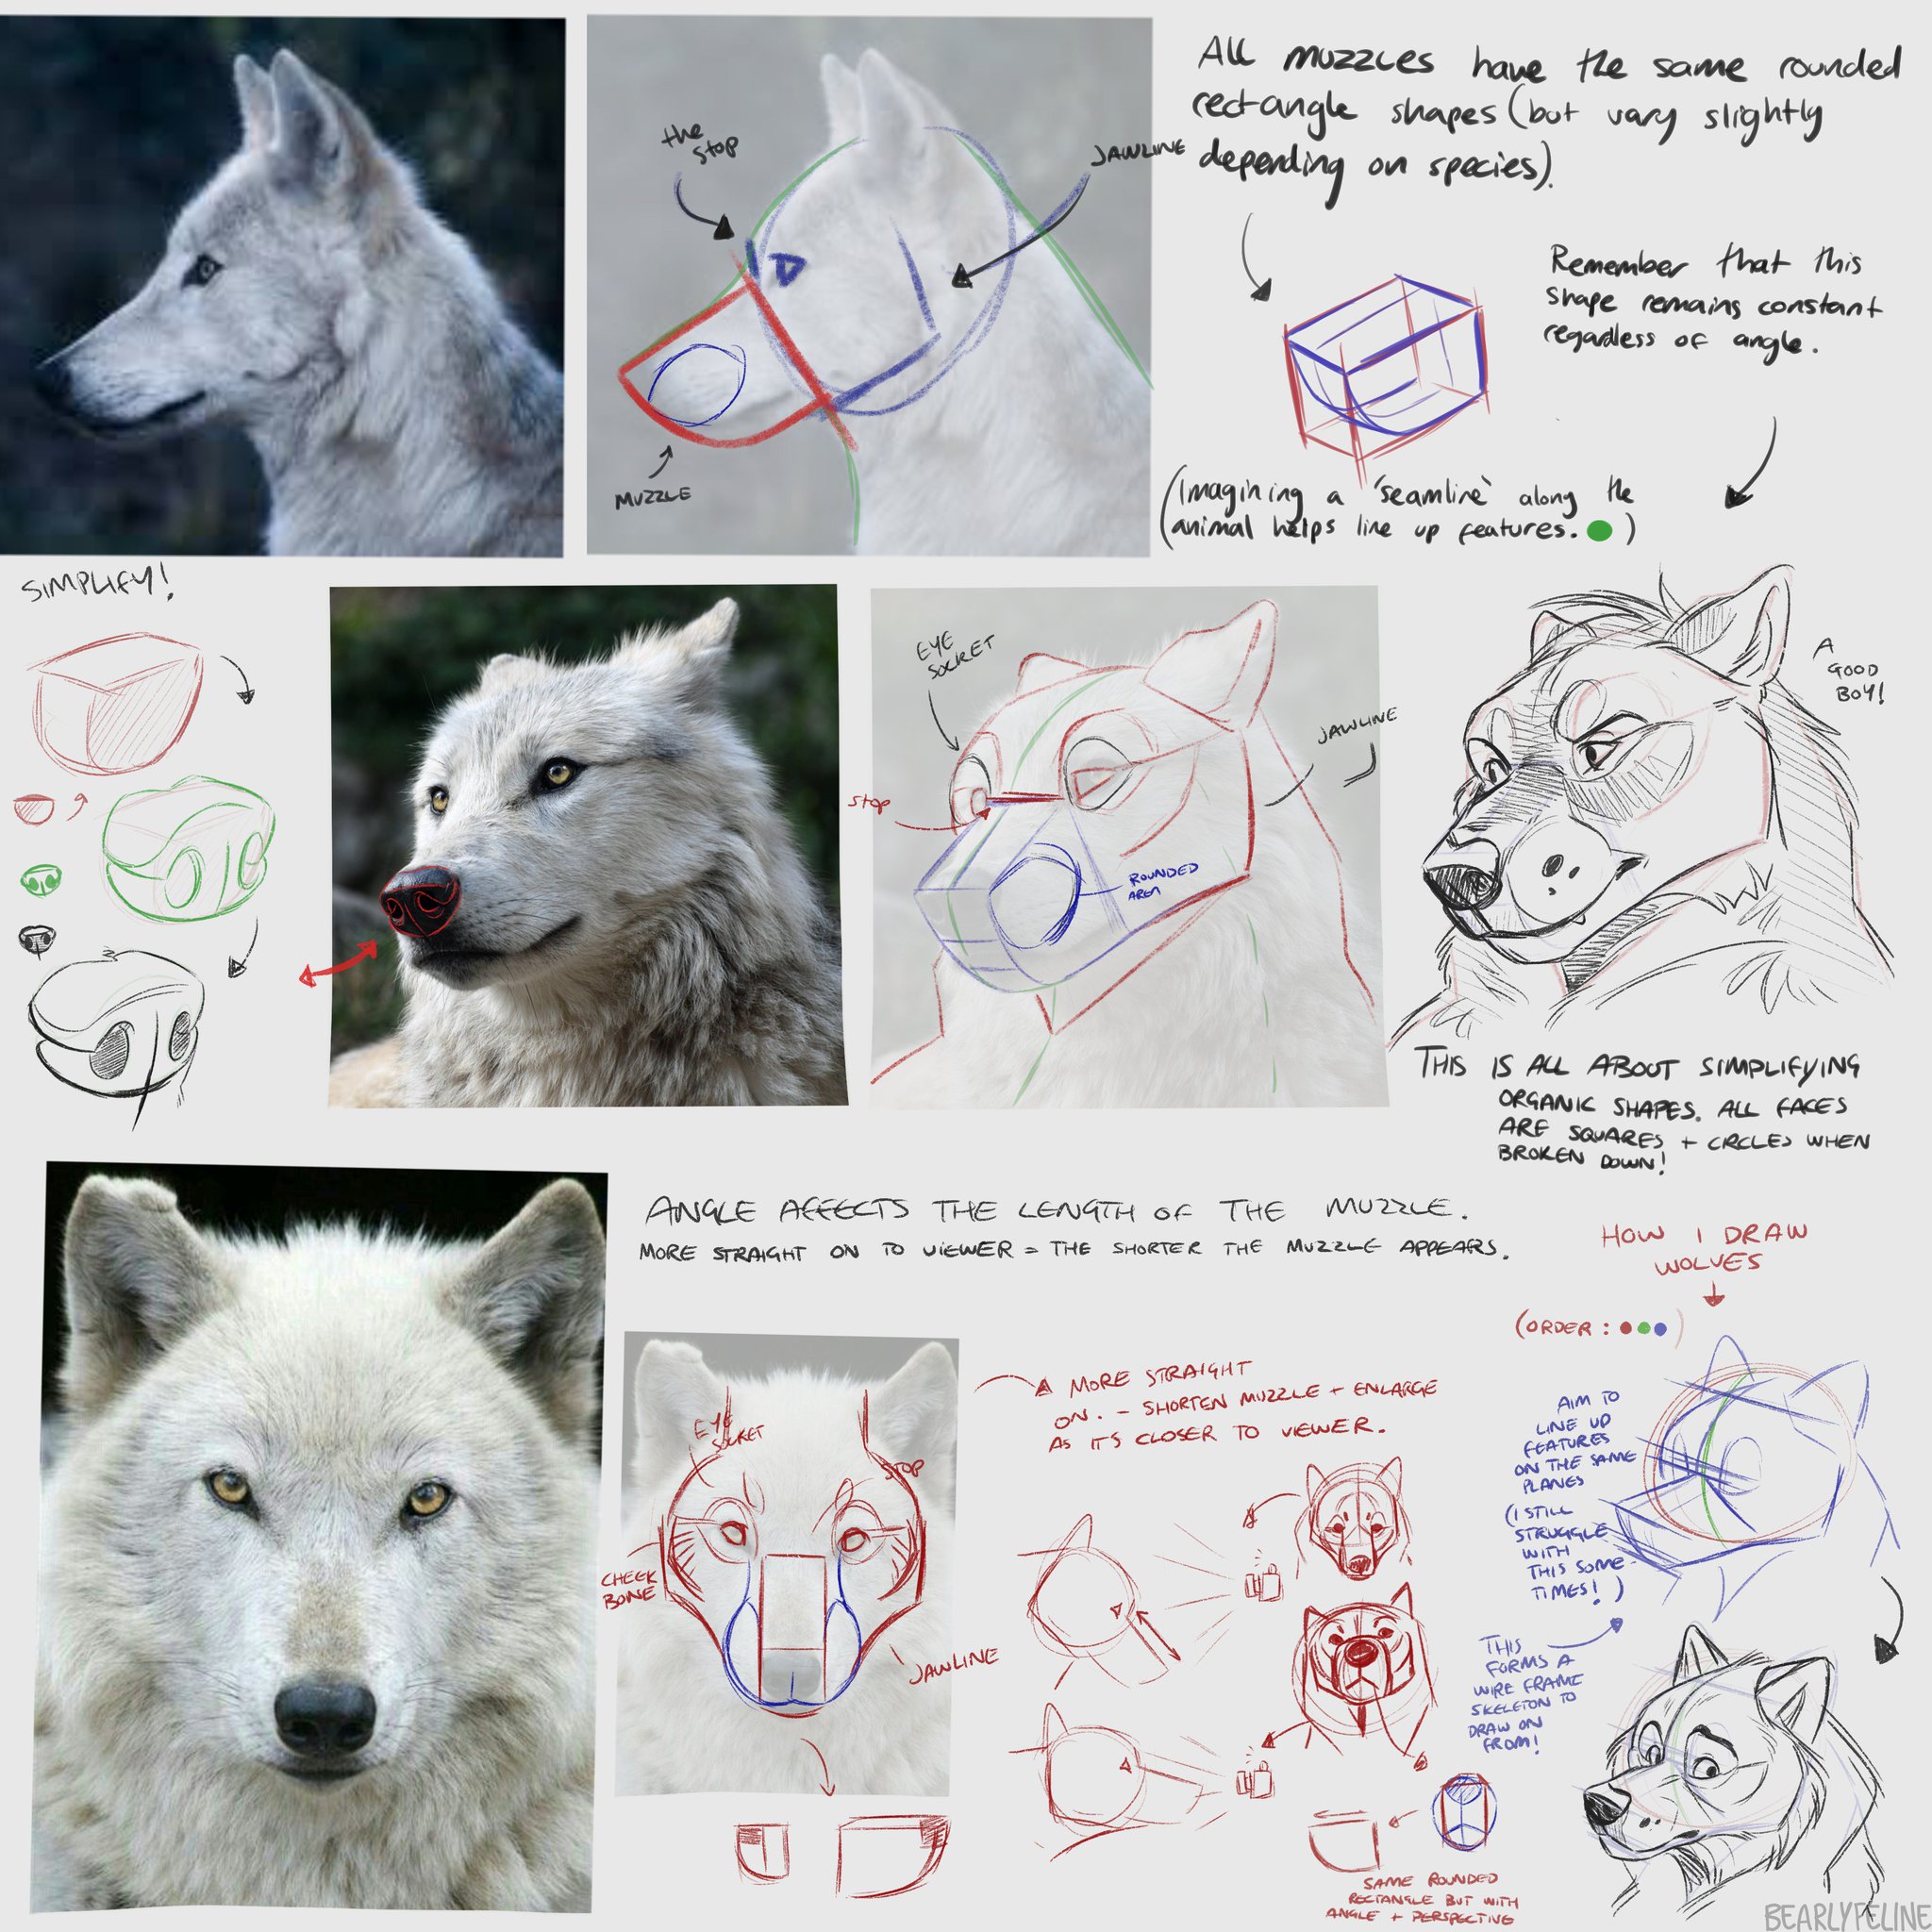 Bri On Twitter: "A Friend Asked Me For Some Muzzle/Face Drawing Advice So I  Made These And Figured Someone Might Find It Useful! (Please Excuse My  Awful Handwriting! :'D) Https://T.co/Vepqvgdwrg" / Twitter